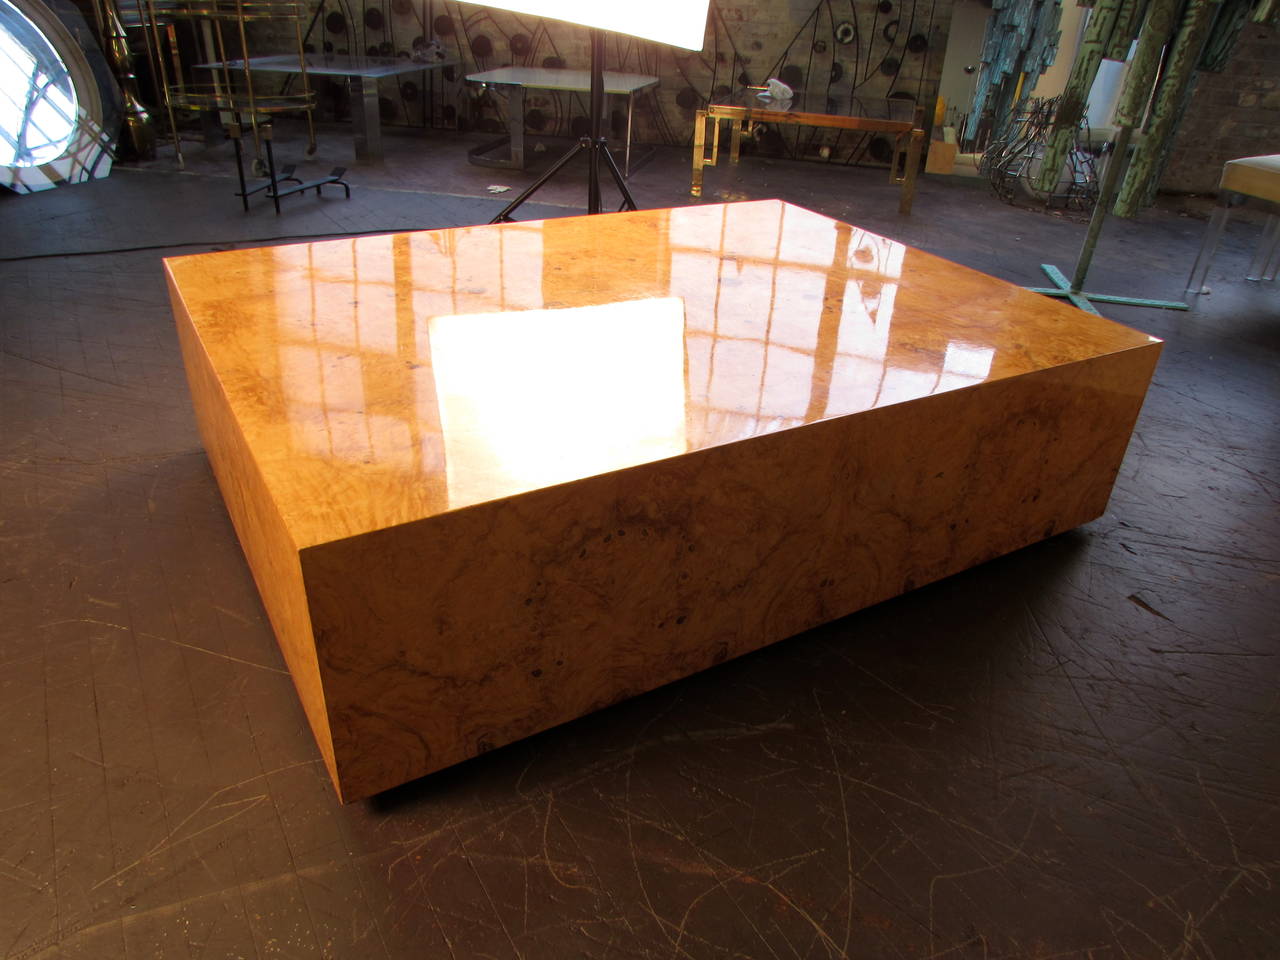 Enormous Burled Wood Coffee Table by Milo Baughman for Thayer Coggin, circa 1970. When not in use as a coffee table, it can double as a dance floor or landing pad. It's that big. It has a high gloss lacquer finish that is most visible in the second